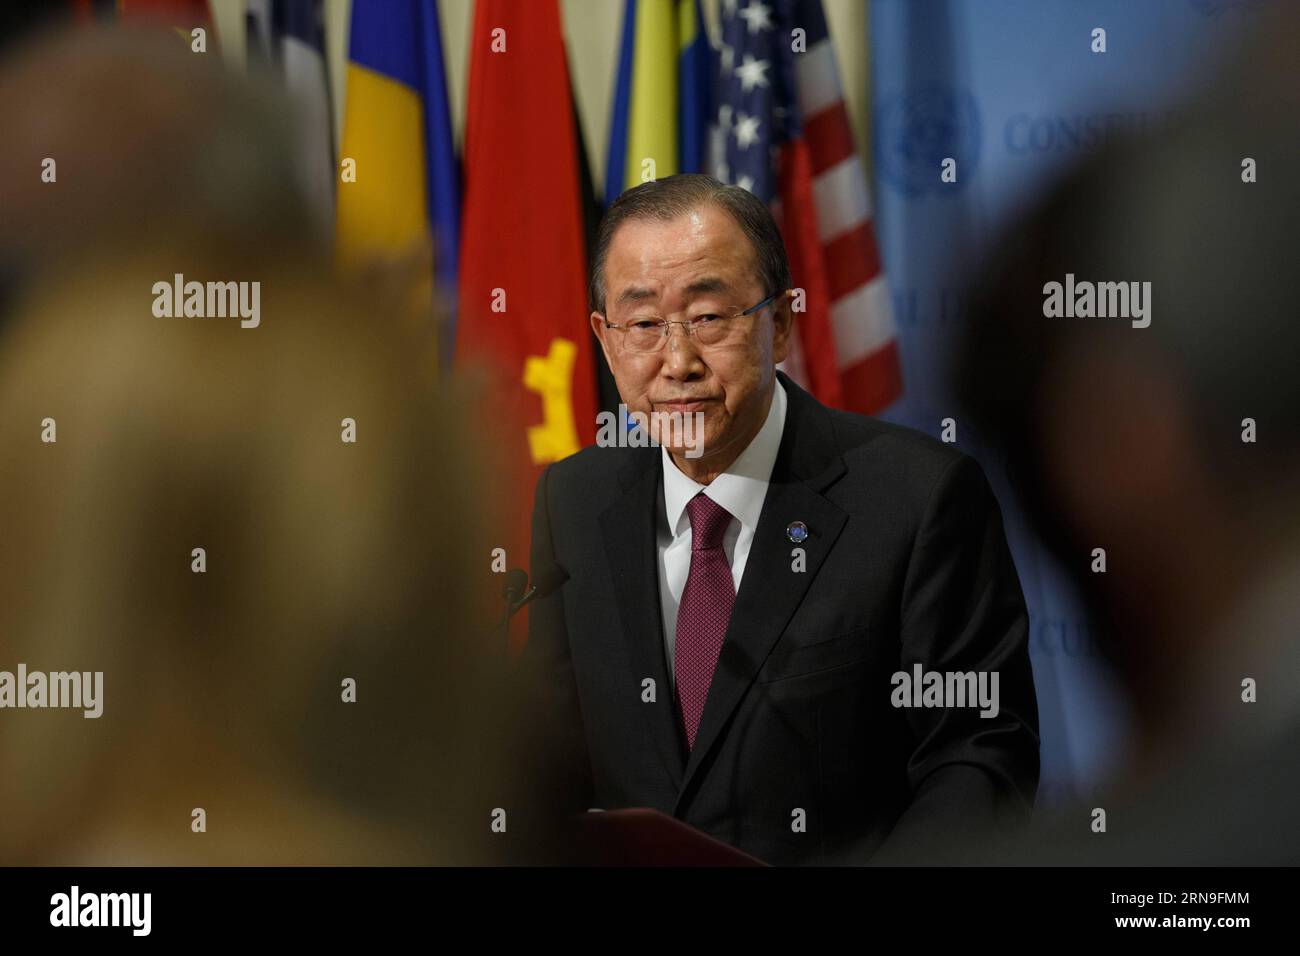 (151203) -- NEW YORK, Dec. 3, 2015 -- United Nations Secretary-General Ban Ki-moon speaks to journalists at the UN headquarters in New York, Dec. 3, 2015. On the International Day of Persons with Disabilities which falls on Dec. 3, UN Secretary-General Ban Ki-moon said as the world sets out to implement sustainable development agenda, persons with disabilities must be recognized as effective agents of change whose contributions bring enormous benefit. ) UN-COP21-BAN KI-MOON-PRESS CONFERENCE LixMuzi PUBLICATIONxNOTxINxCHN   151203 New York DEC 3 2015 United Nations Secretary General Ban KI Moon Stock Photo